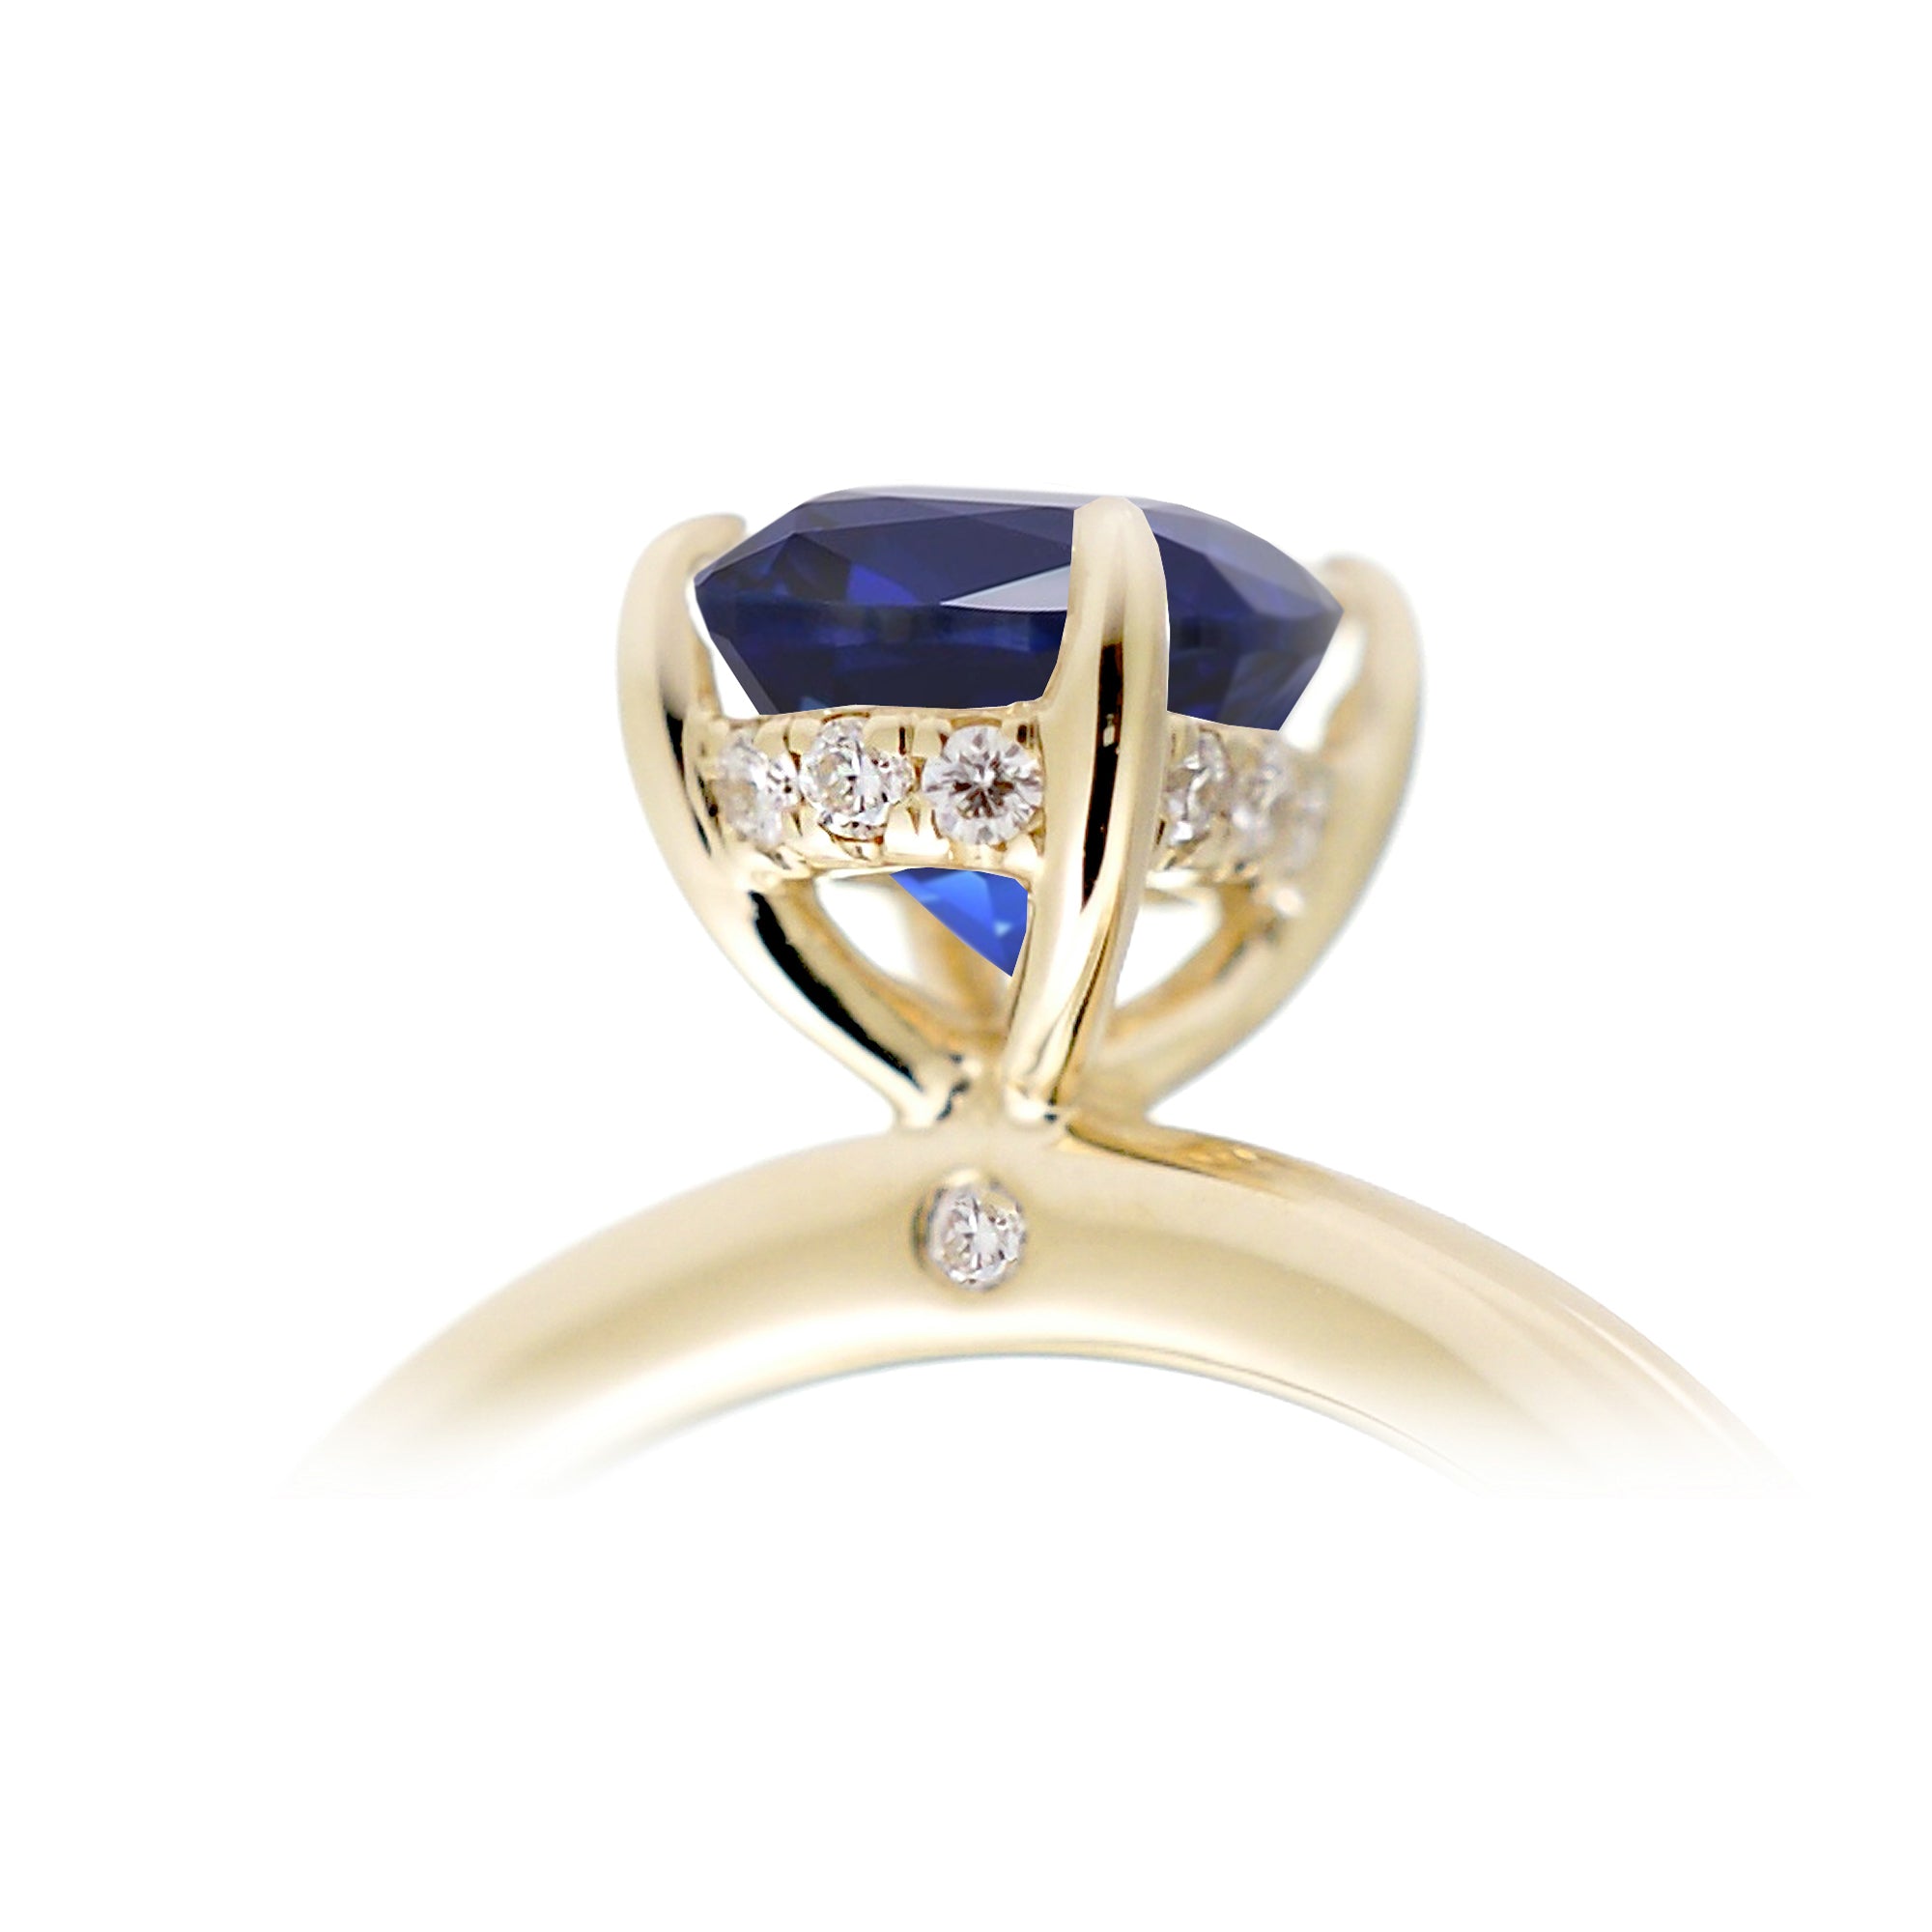 Oval cut blue sapphire engagement ring with a diamond hidden halo and solid band yellow gold